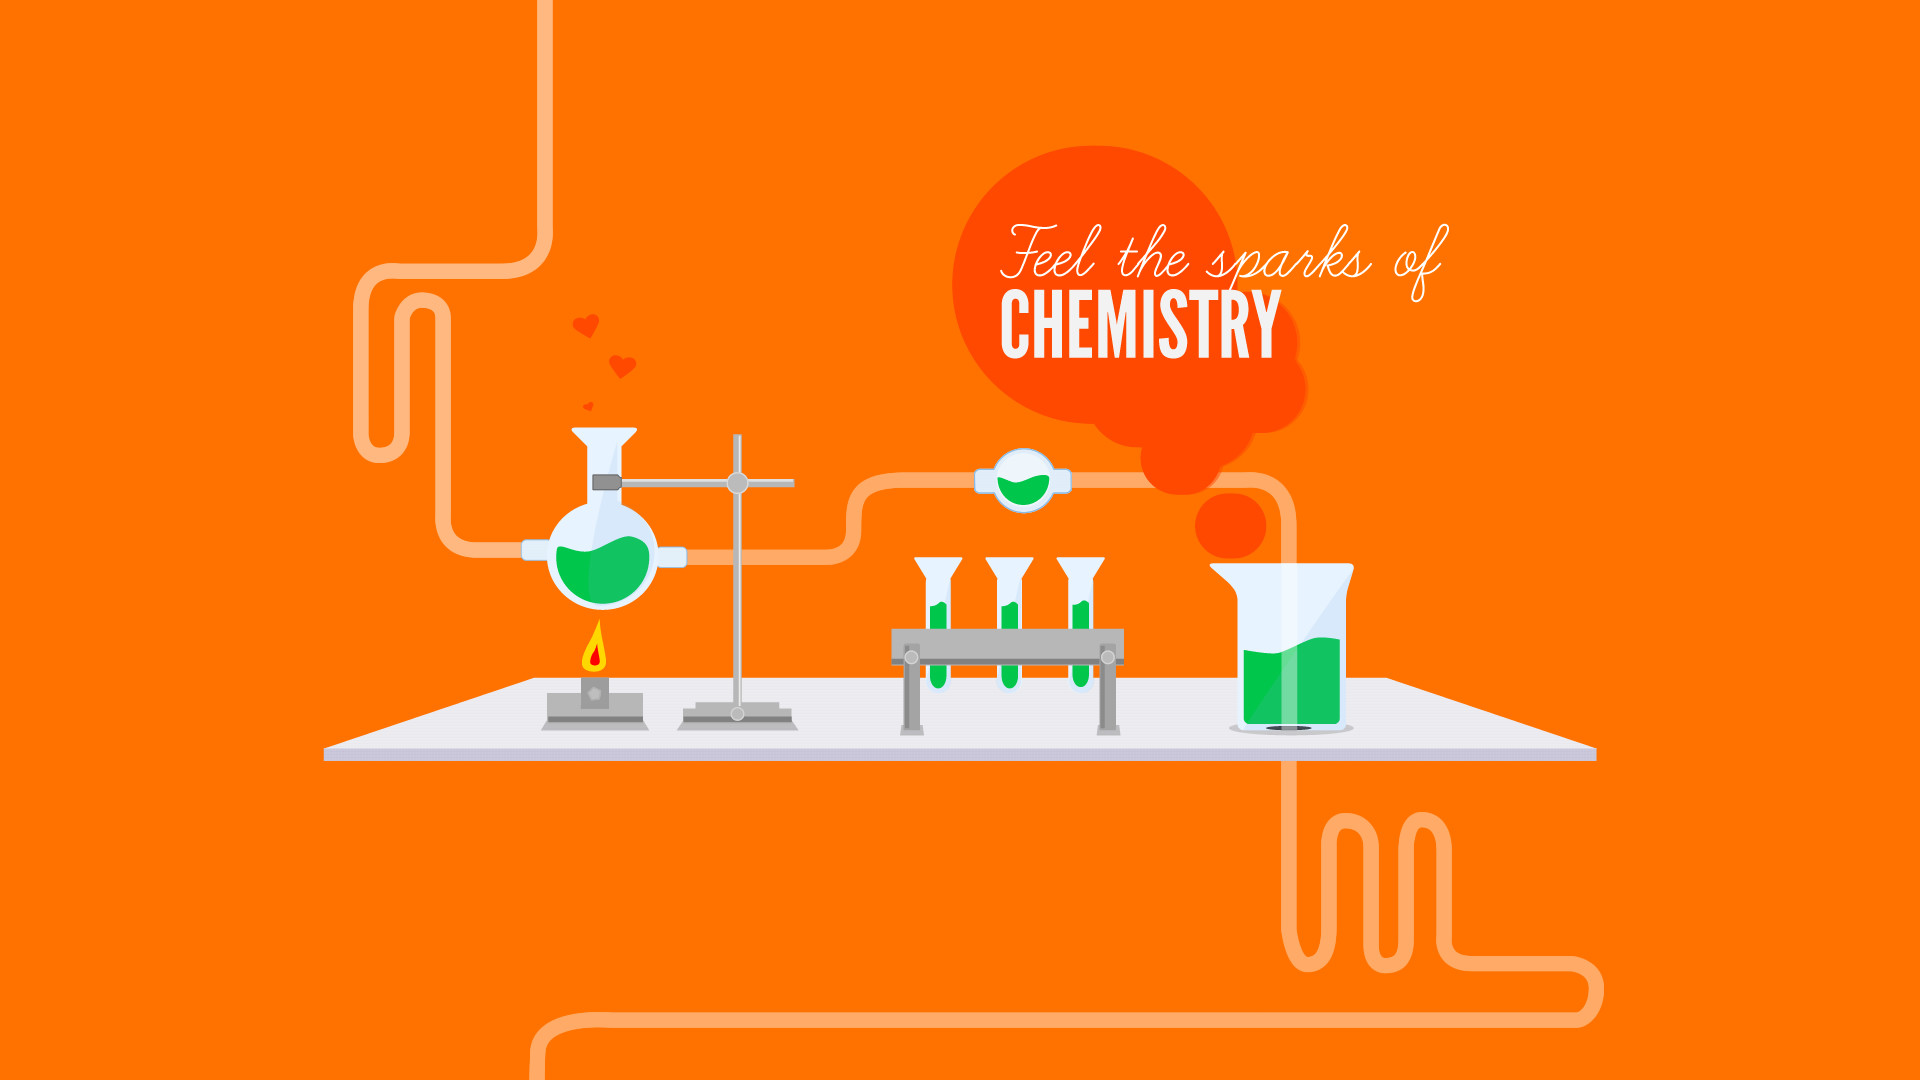 1920x1080 Feel-the-sparks-of-Chemistry-1920px-1080px-wallpaper-